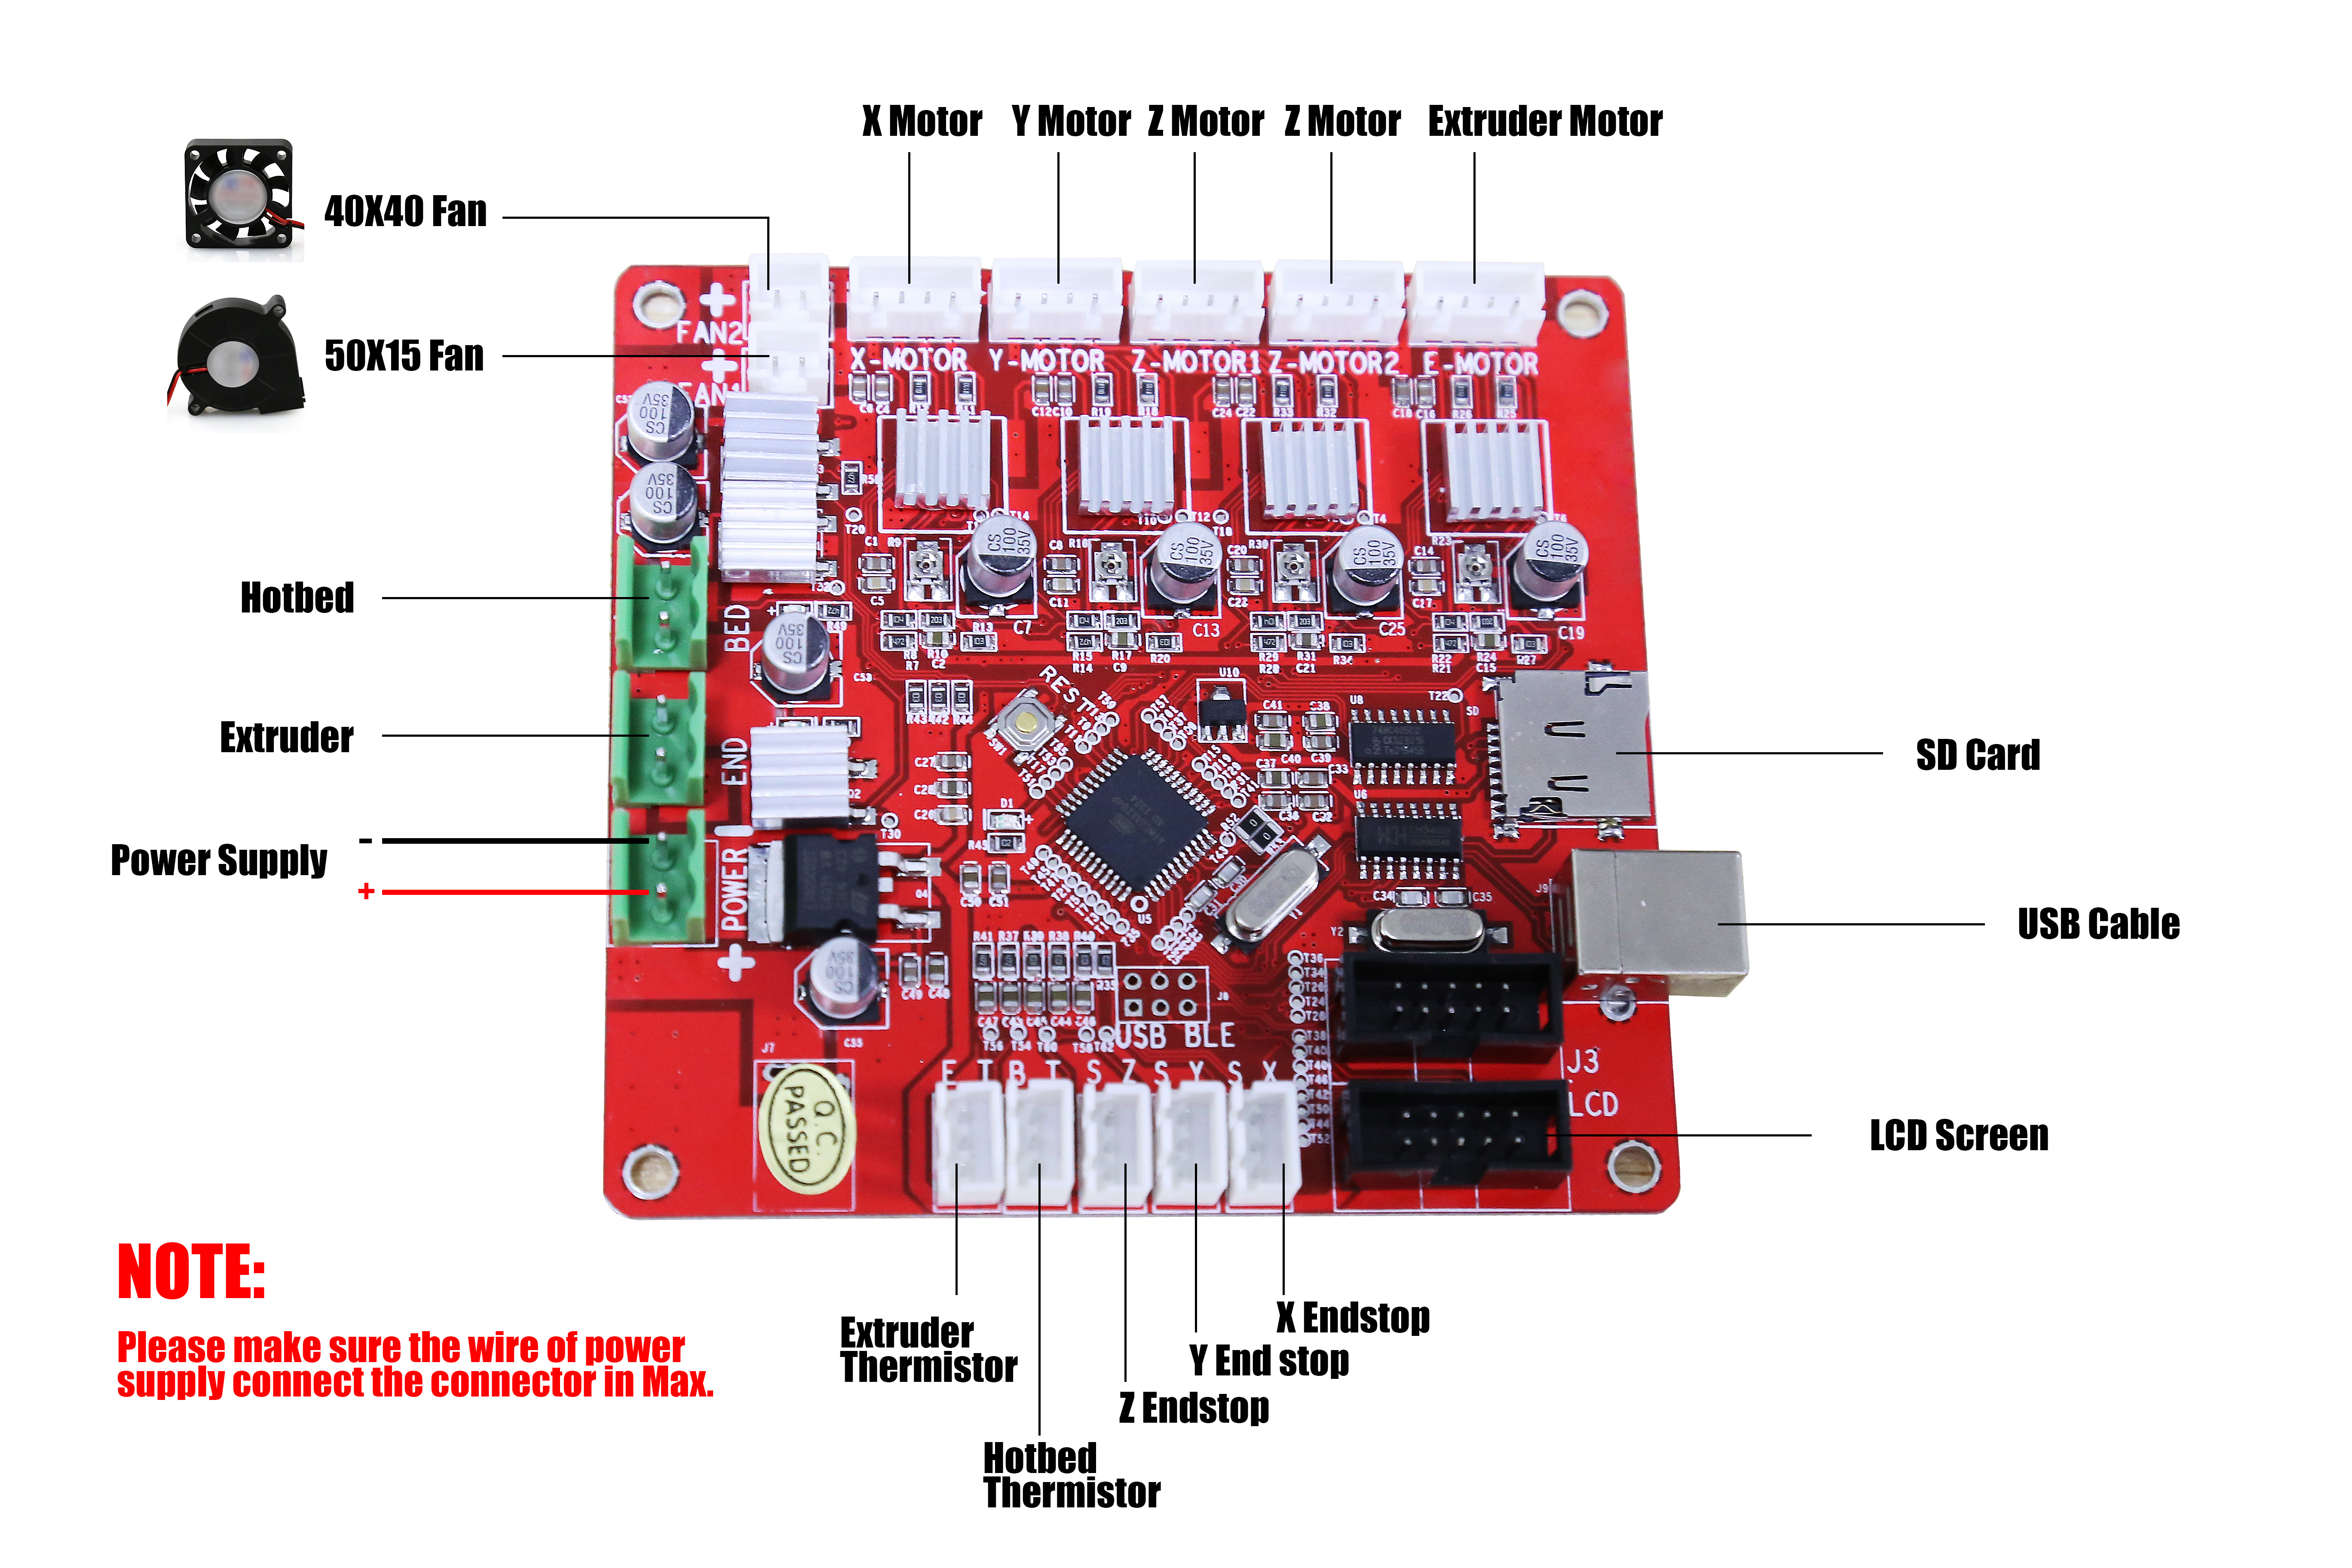 Anet Mainboard(S) [3Dprint.wiki] - Anet A8 Wiring Diagram